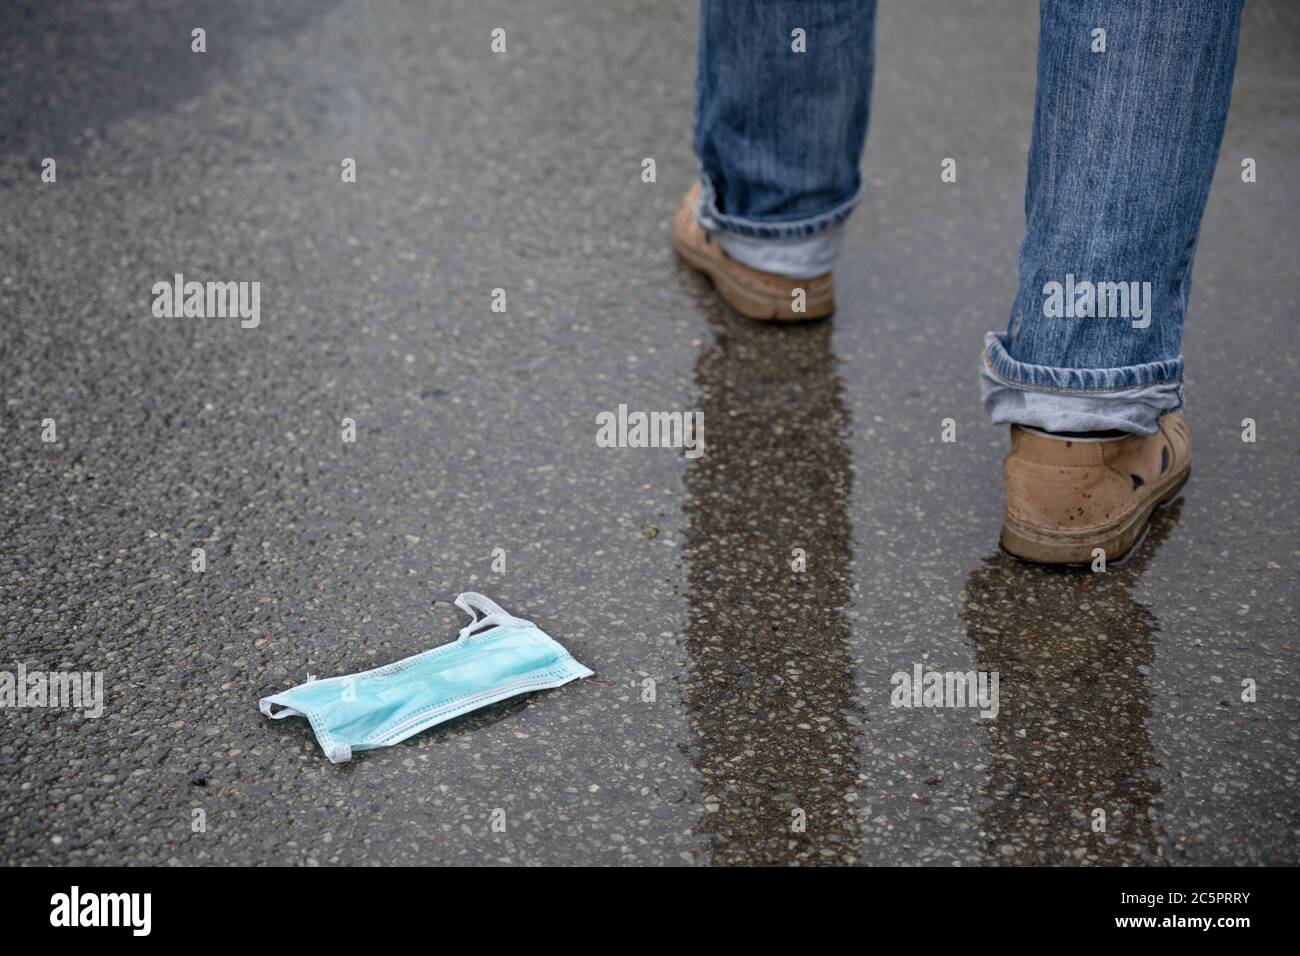 Medical face mask discarded on the wet asphalt, man's legs walk  away, reckless behavior against the risk of coronavirus infection after the lockdown, Stock Photo